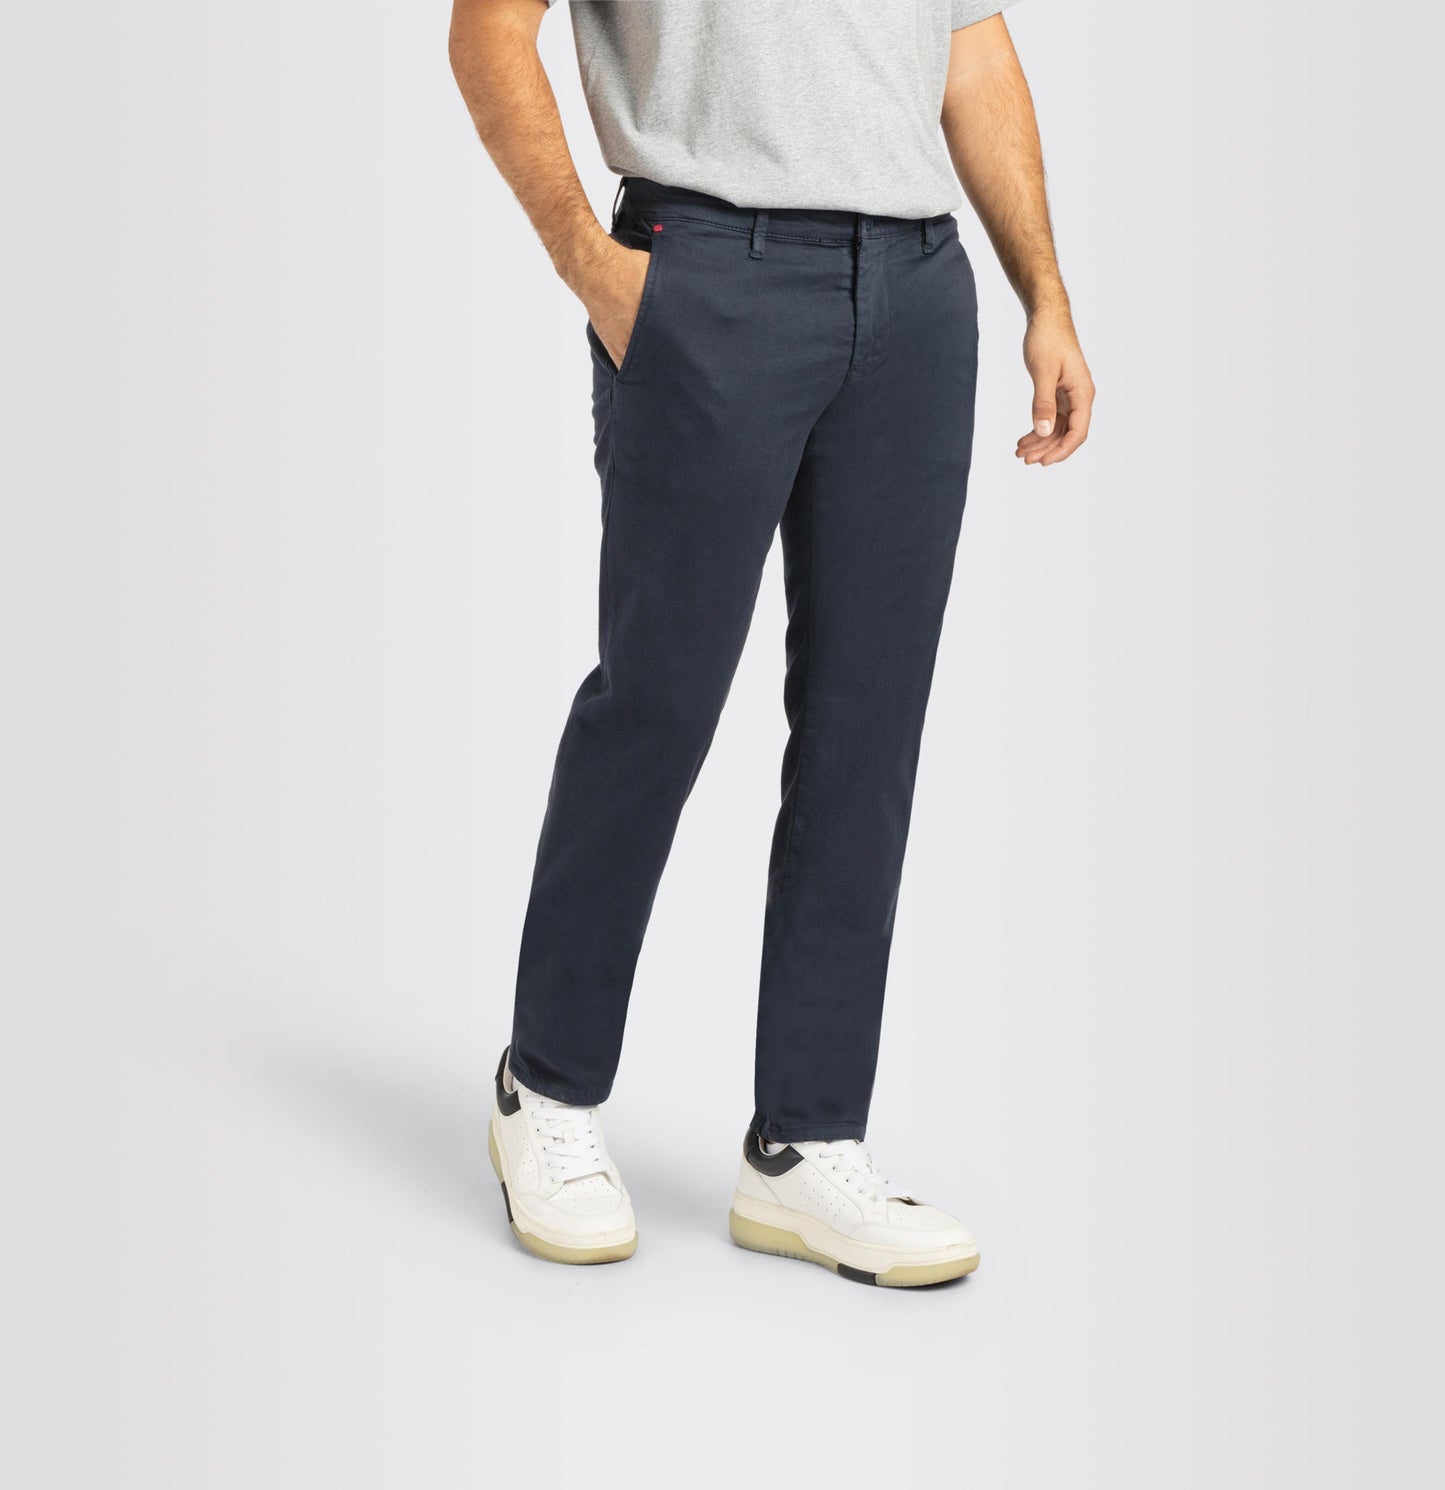 Driving Pants in navy by MAC